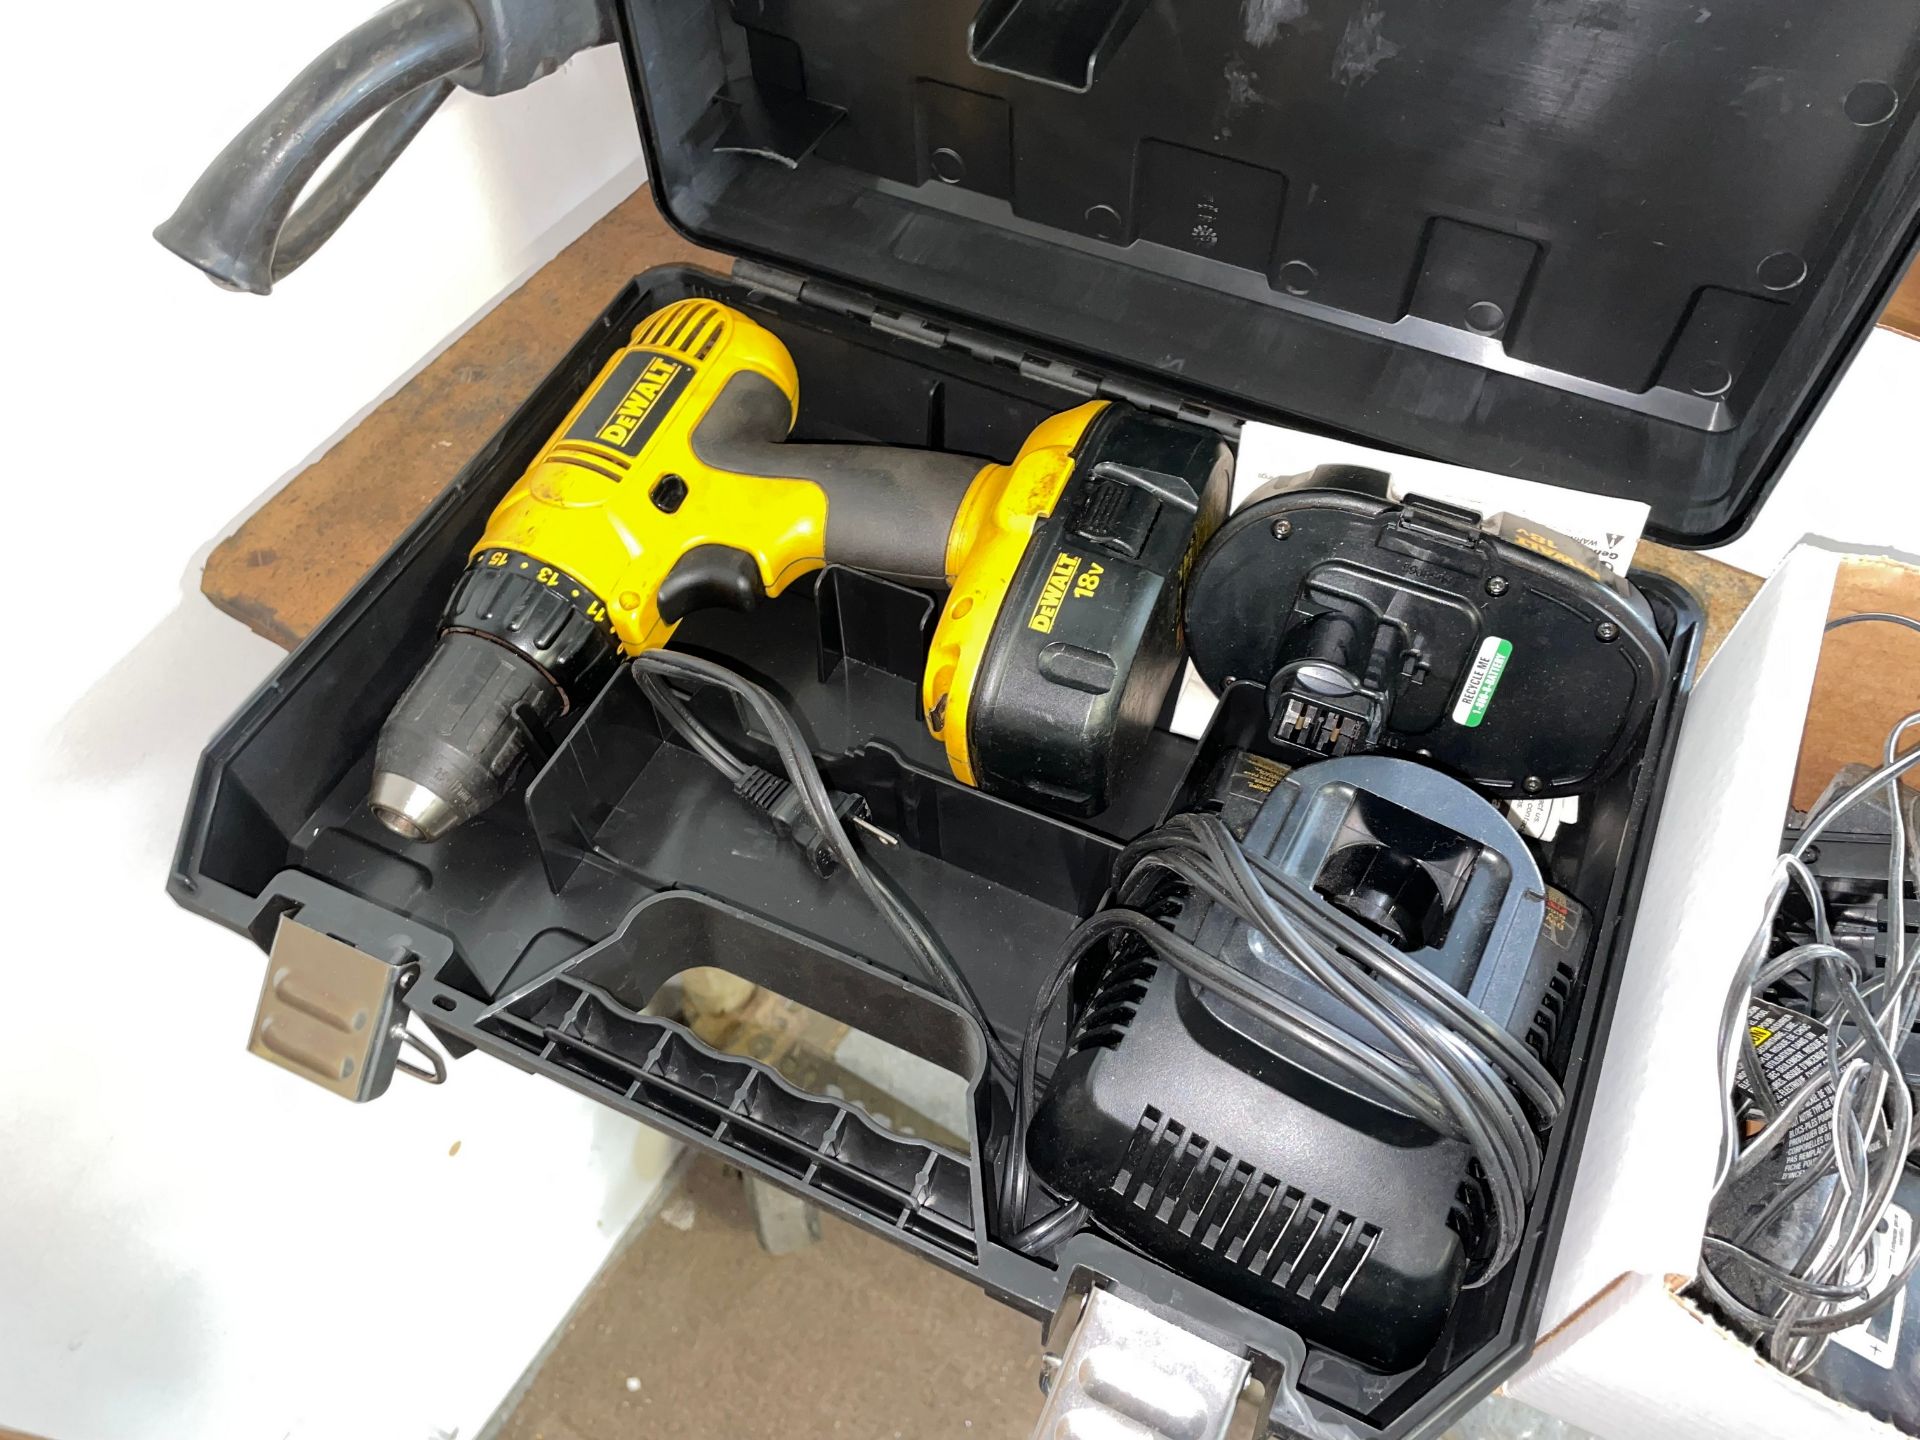 DeWalt 18 Volt Battery Powered Drill with Charger - Image 2 of 2